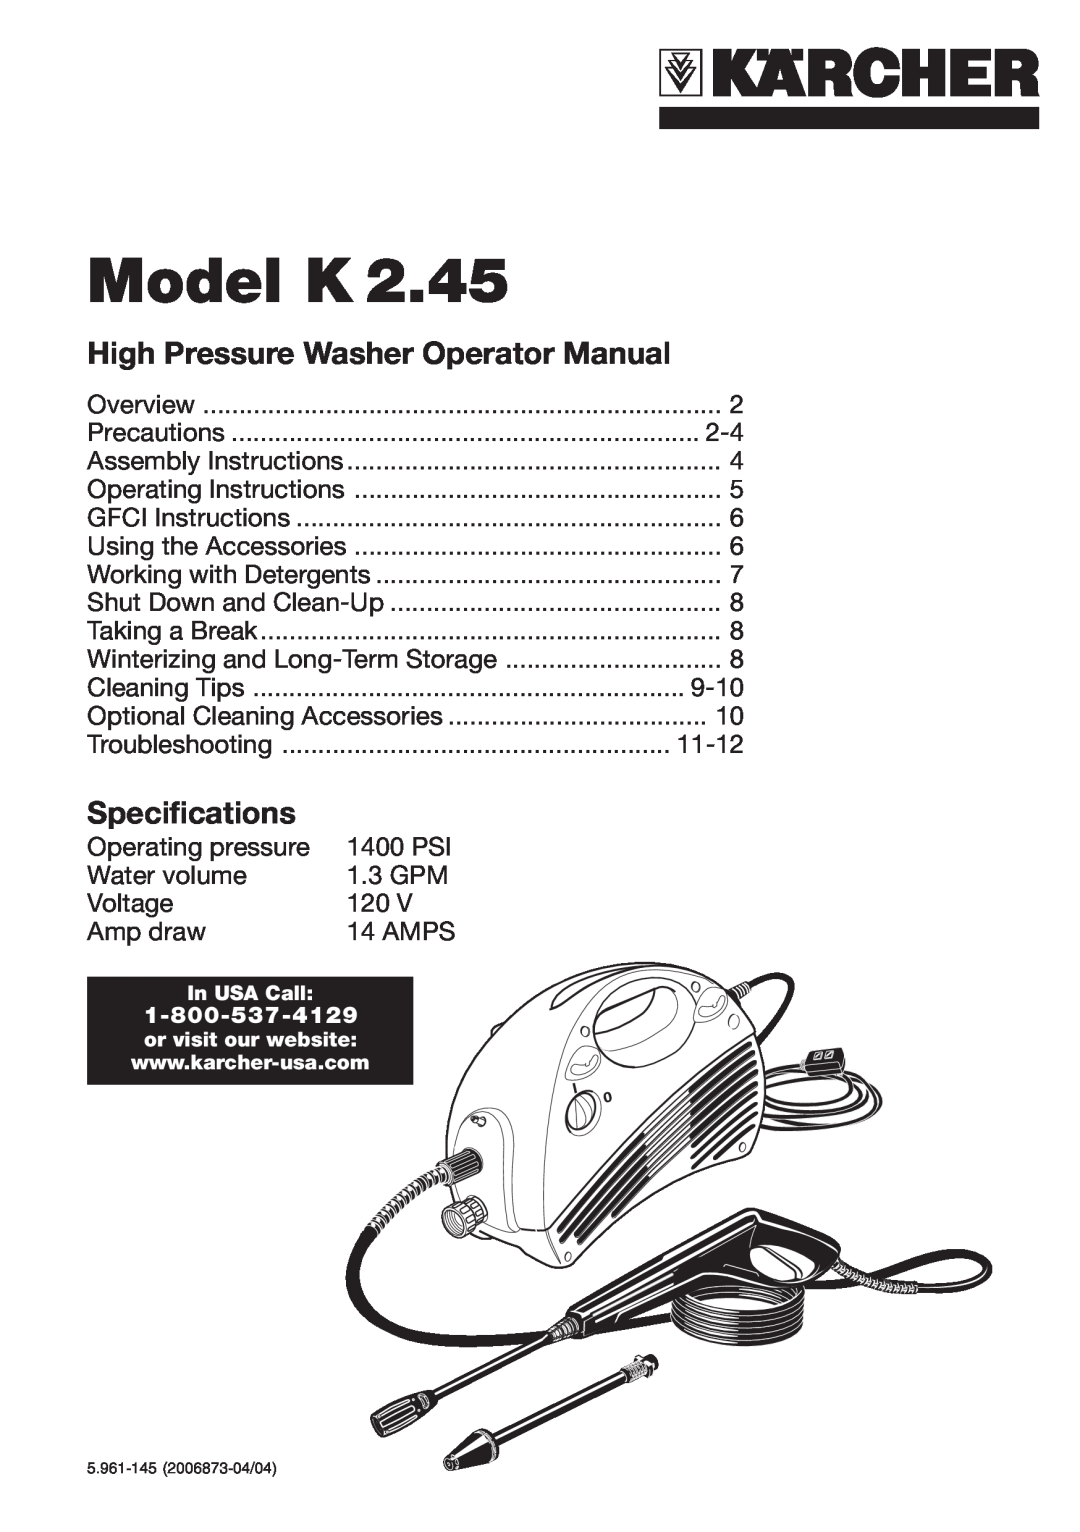 Karcher K 2.45 specifications Model K, High Pressure Washer Operator Manual, Specifications 